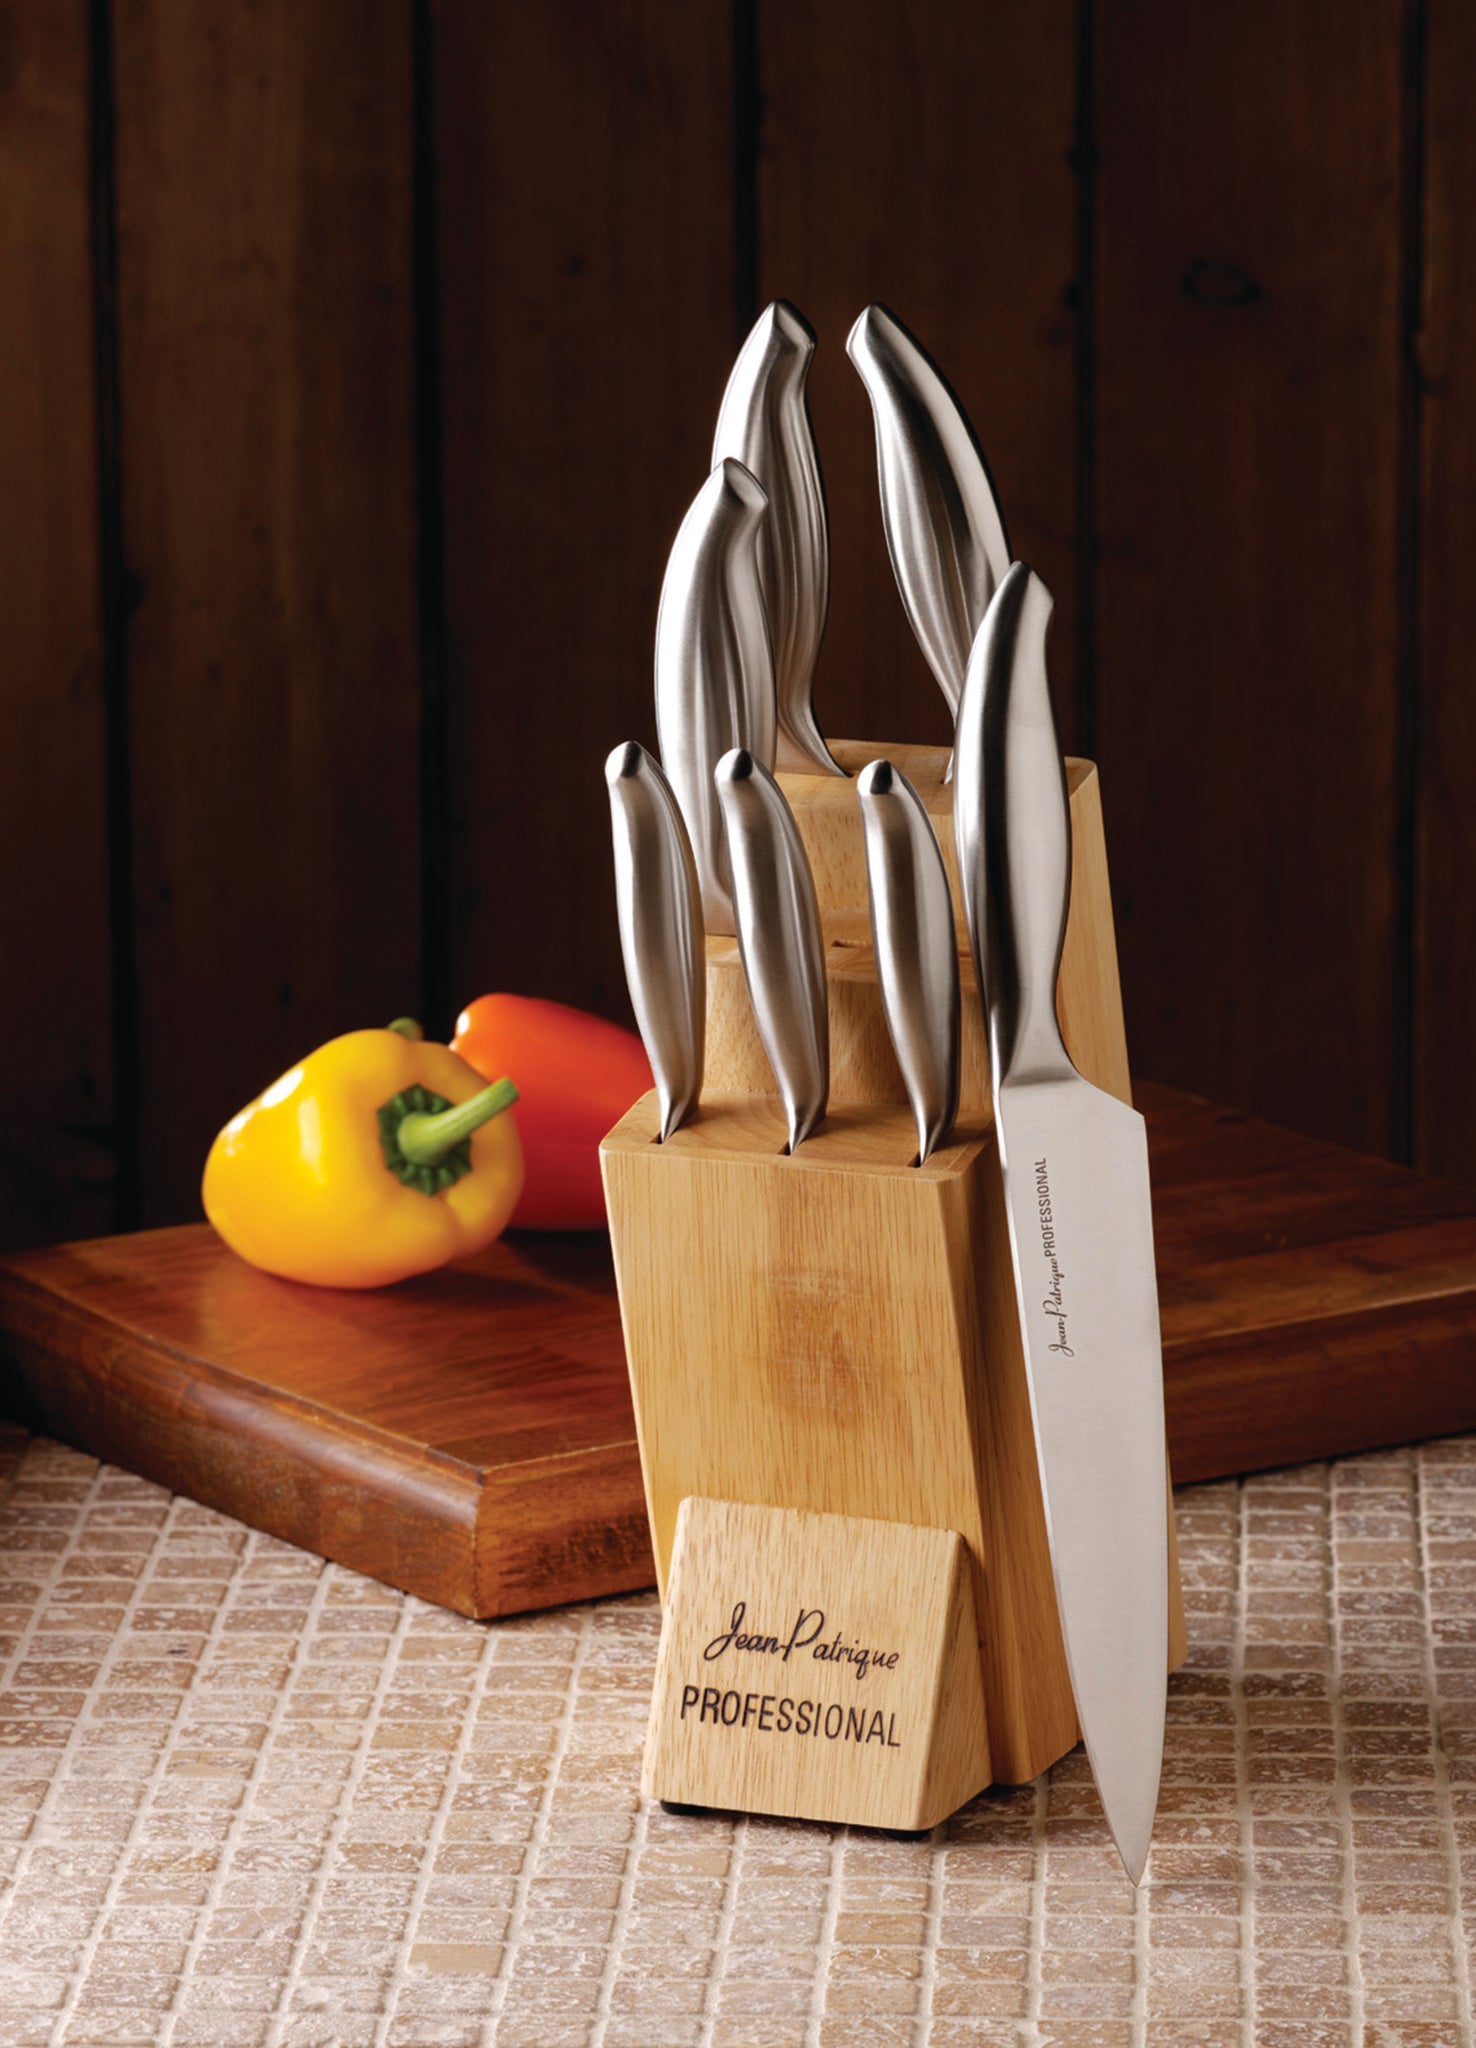 Knife Block Sets 7 Pieces Kitchen Knife Set with Block Wooden